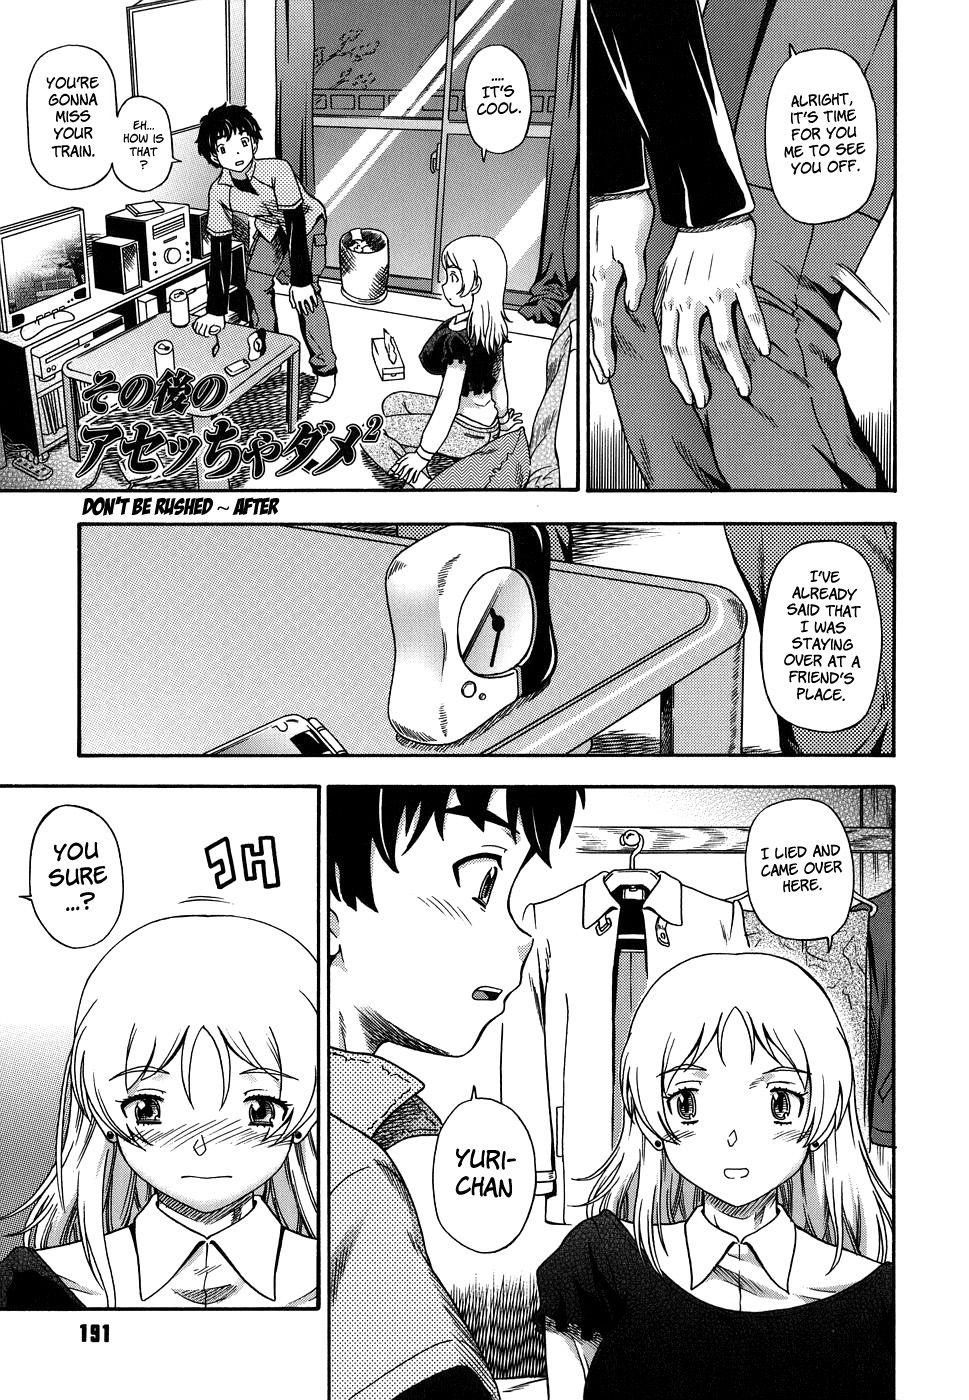 Hentai Manga Comic-Love Me Do-Chapter 9-Don't Be Rushed-After-1